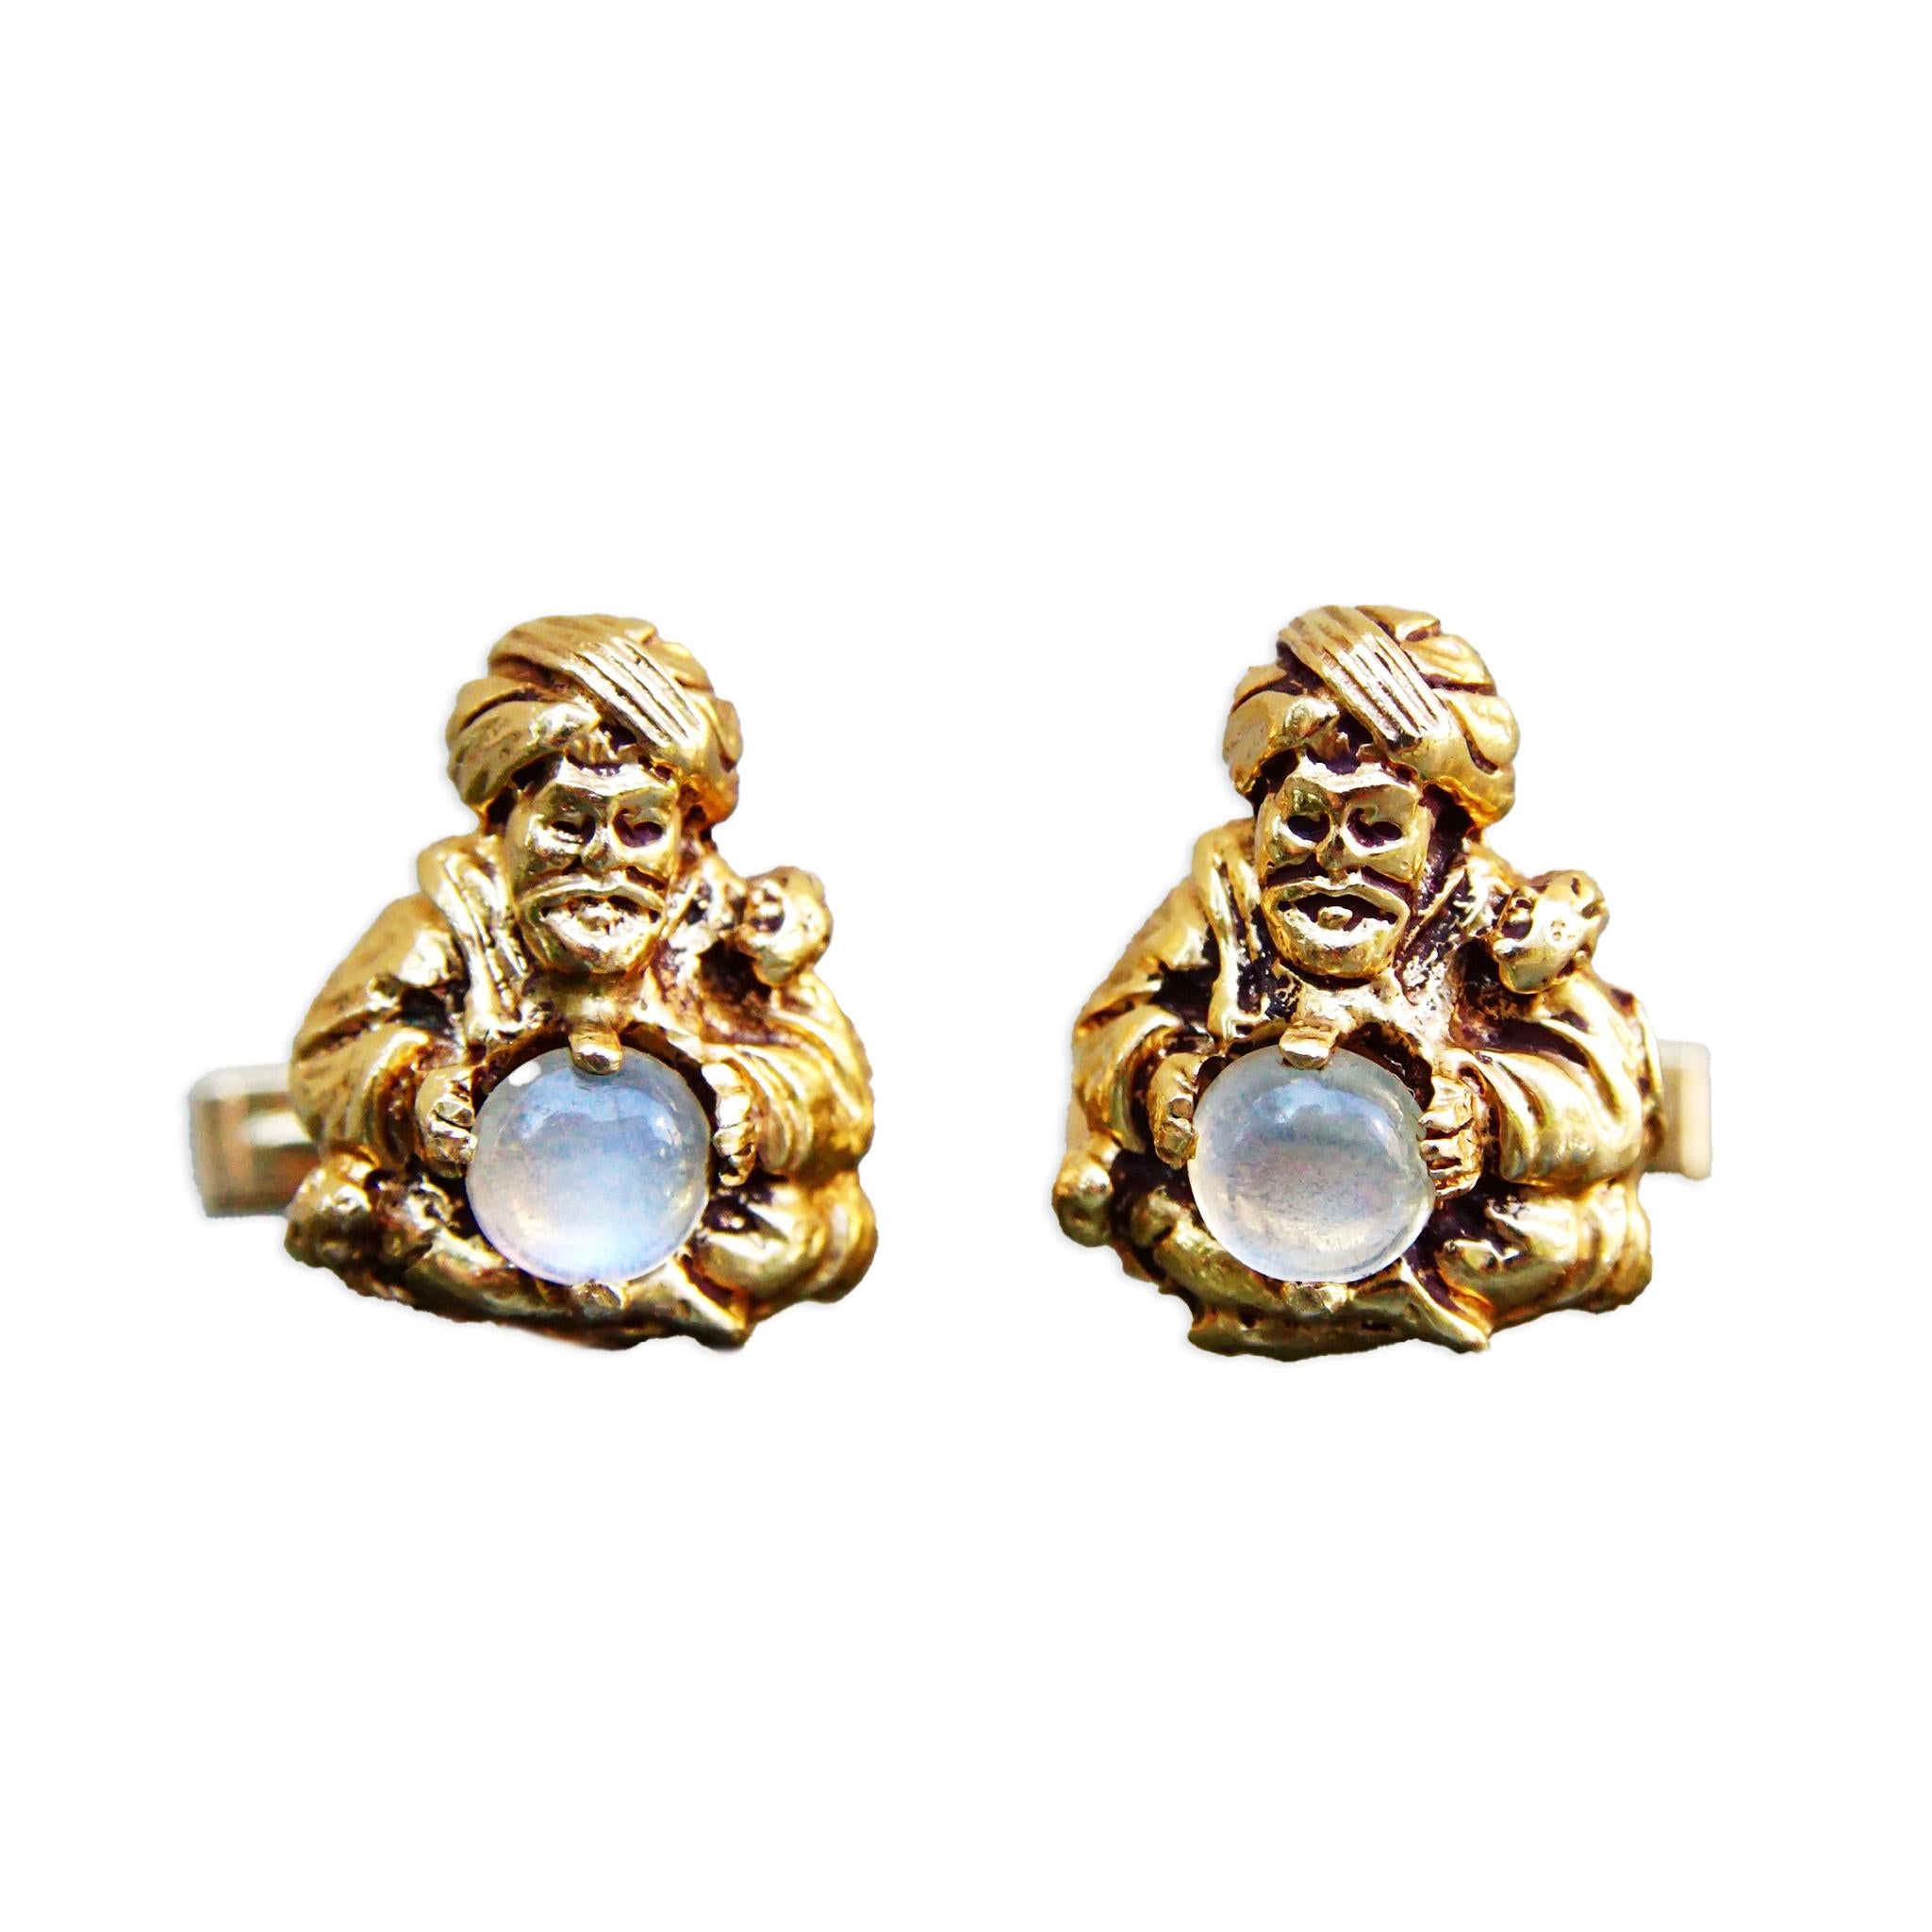 An amazing pair of 14k moonstone fortune teller cufflinks. Each cufflink features a small yellow gold psychic figure holding a round moonstone cabochon. The crystal gazer is incredibly detailed and even has a small snake wrapped its shoulder. The